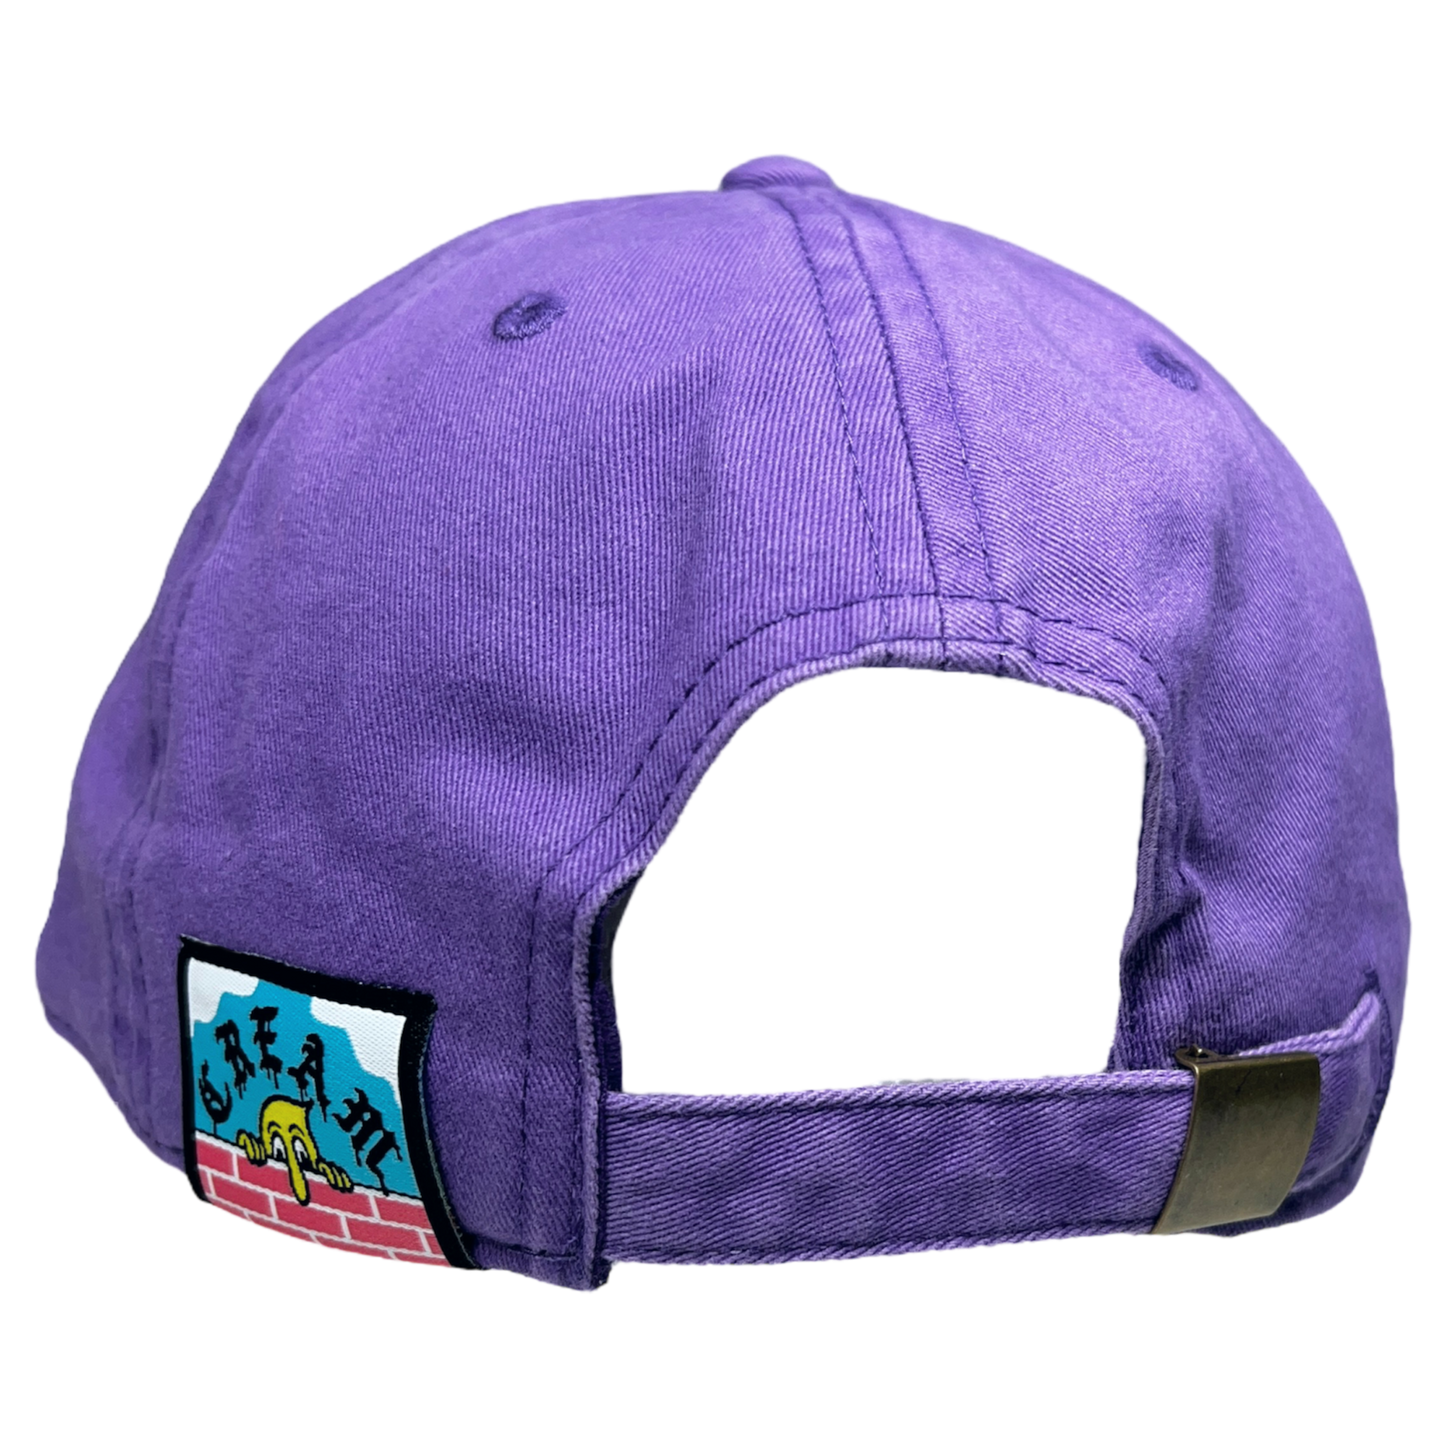 "Ugly But Honest" - Lilac Hat